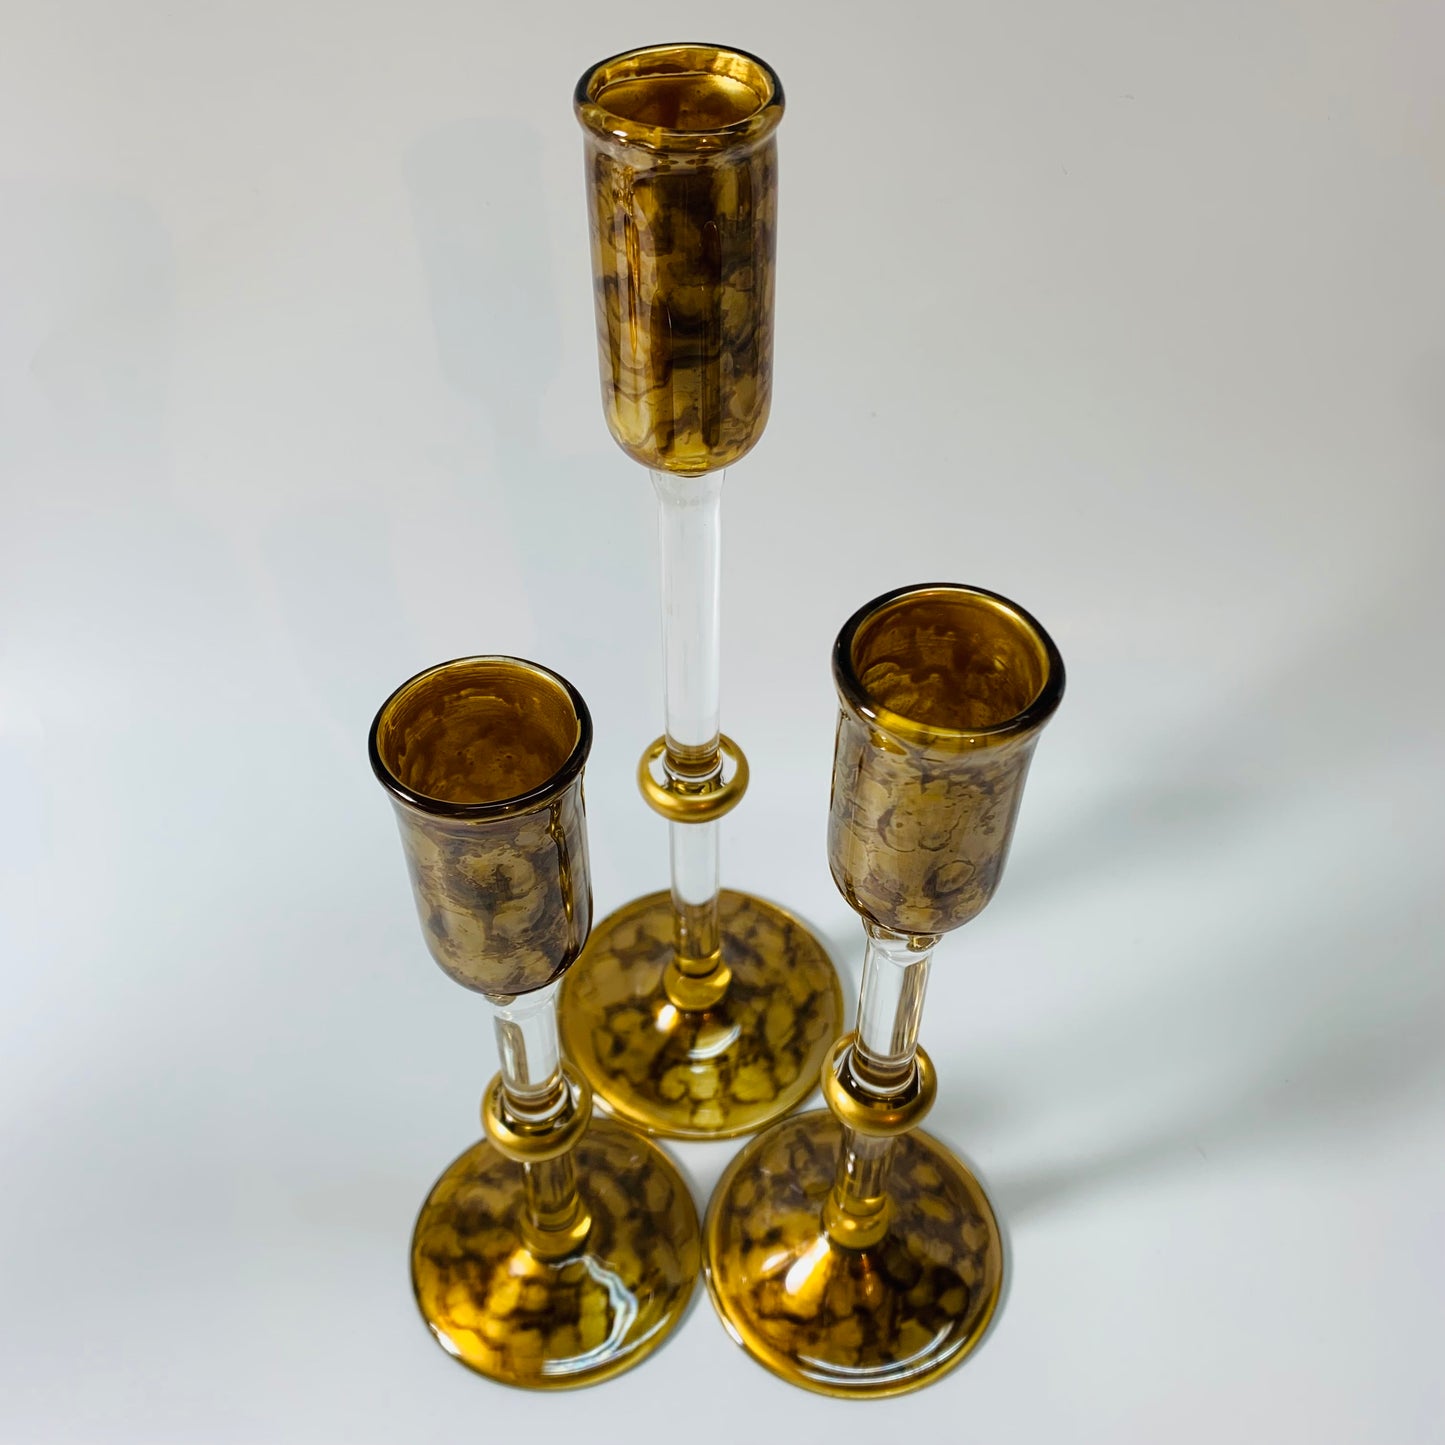 Long Stem Blown Glass Candle Holder - Tulip Gold & Brown